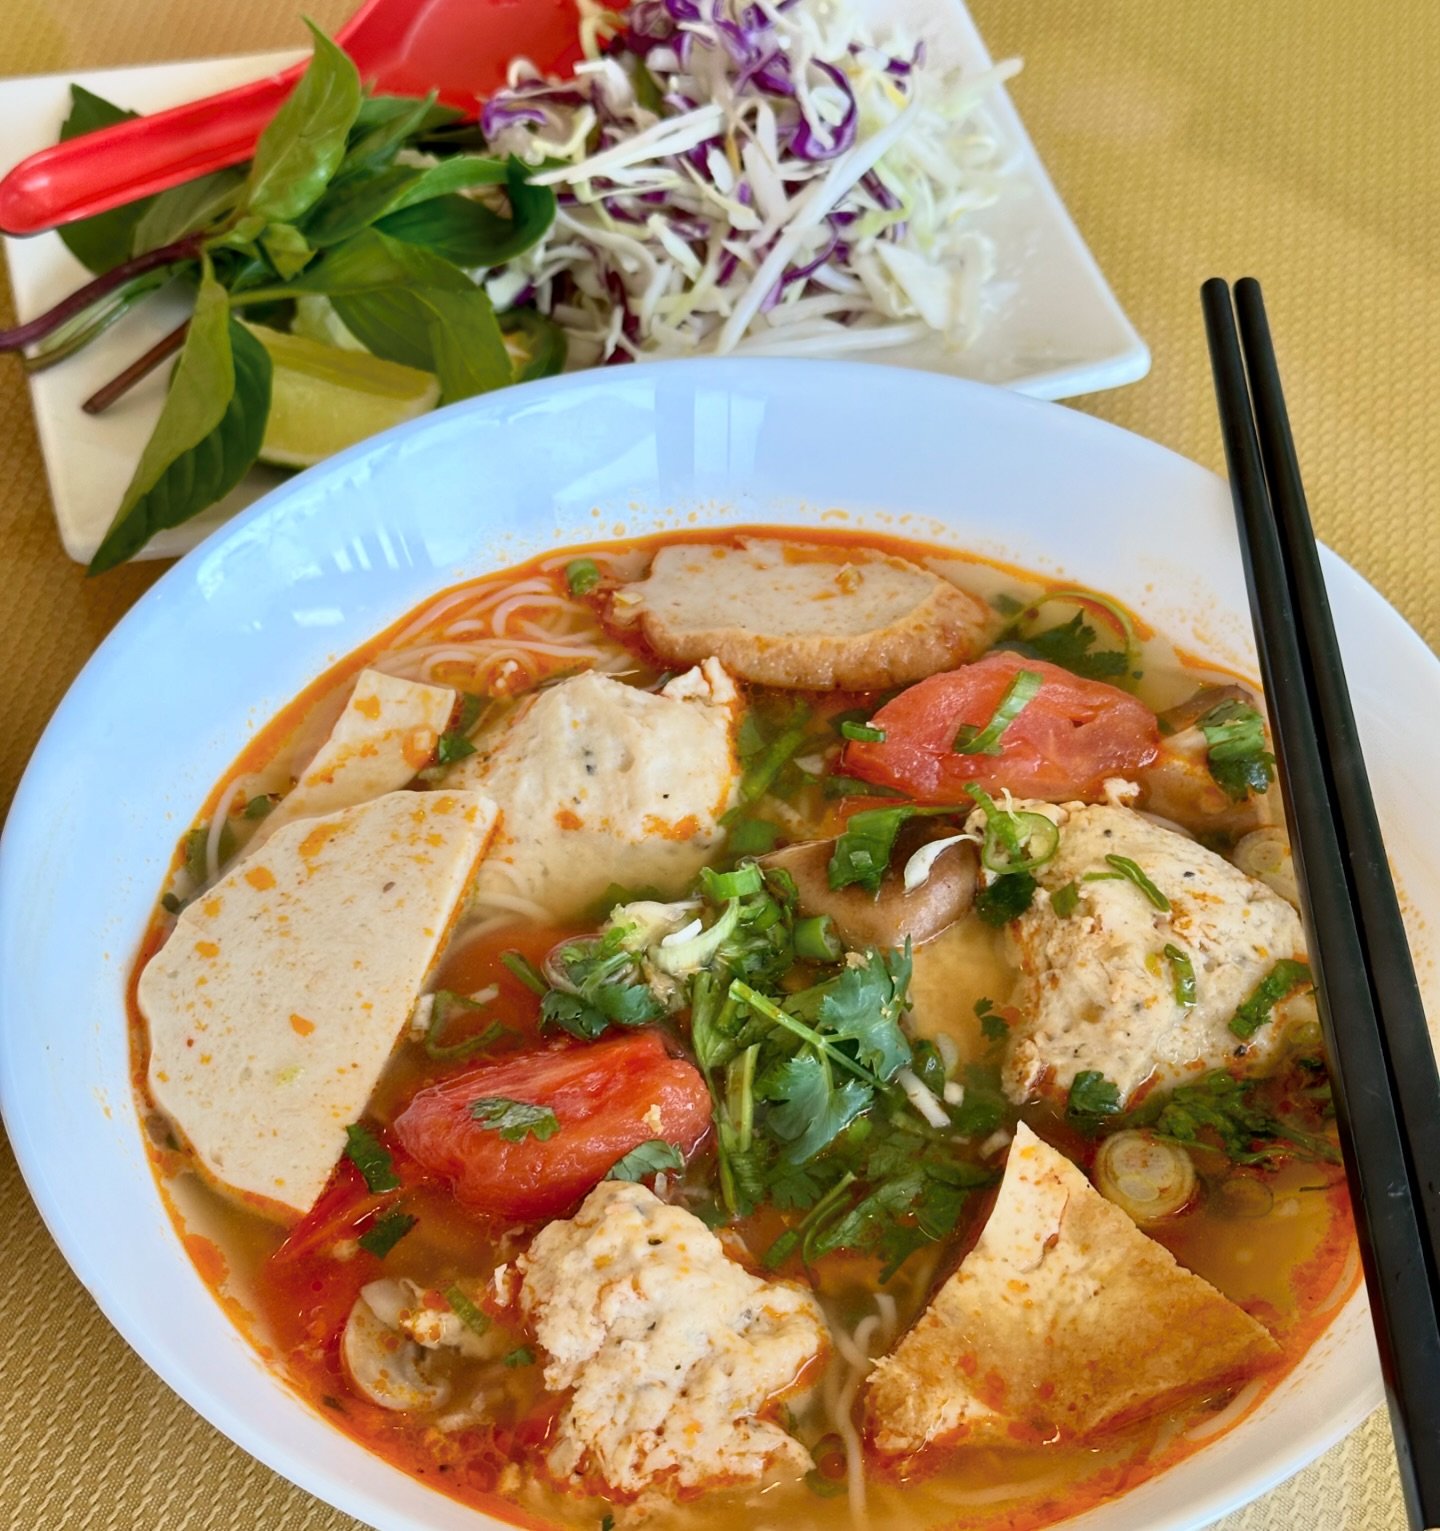 Here&rsquo;s another quick peek at a new menu item! B&uacute;n Ri&ecirc;u, Chay&rsquo;s Vegan Crab Noodle soup is loaded with vegan crab patty, tofu, vegan chả, fresh tomatoes, and mushrooms. Our new menu comes out next week but you can ask for the s